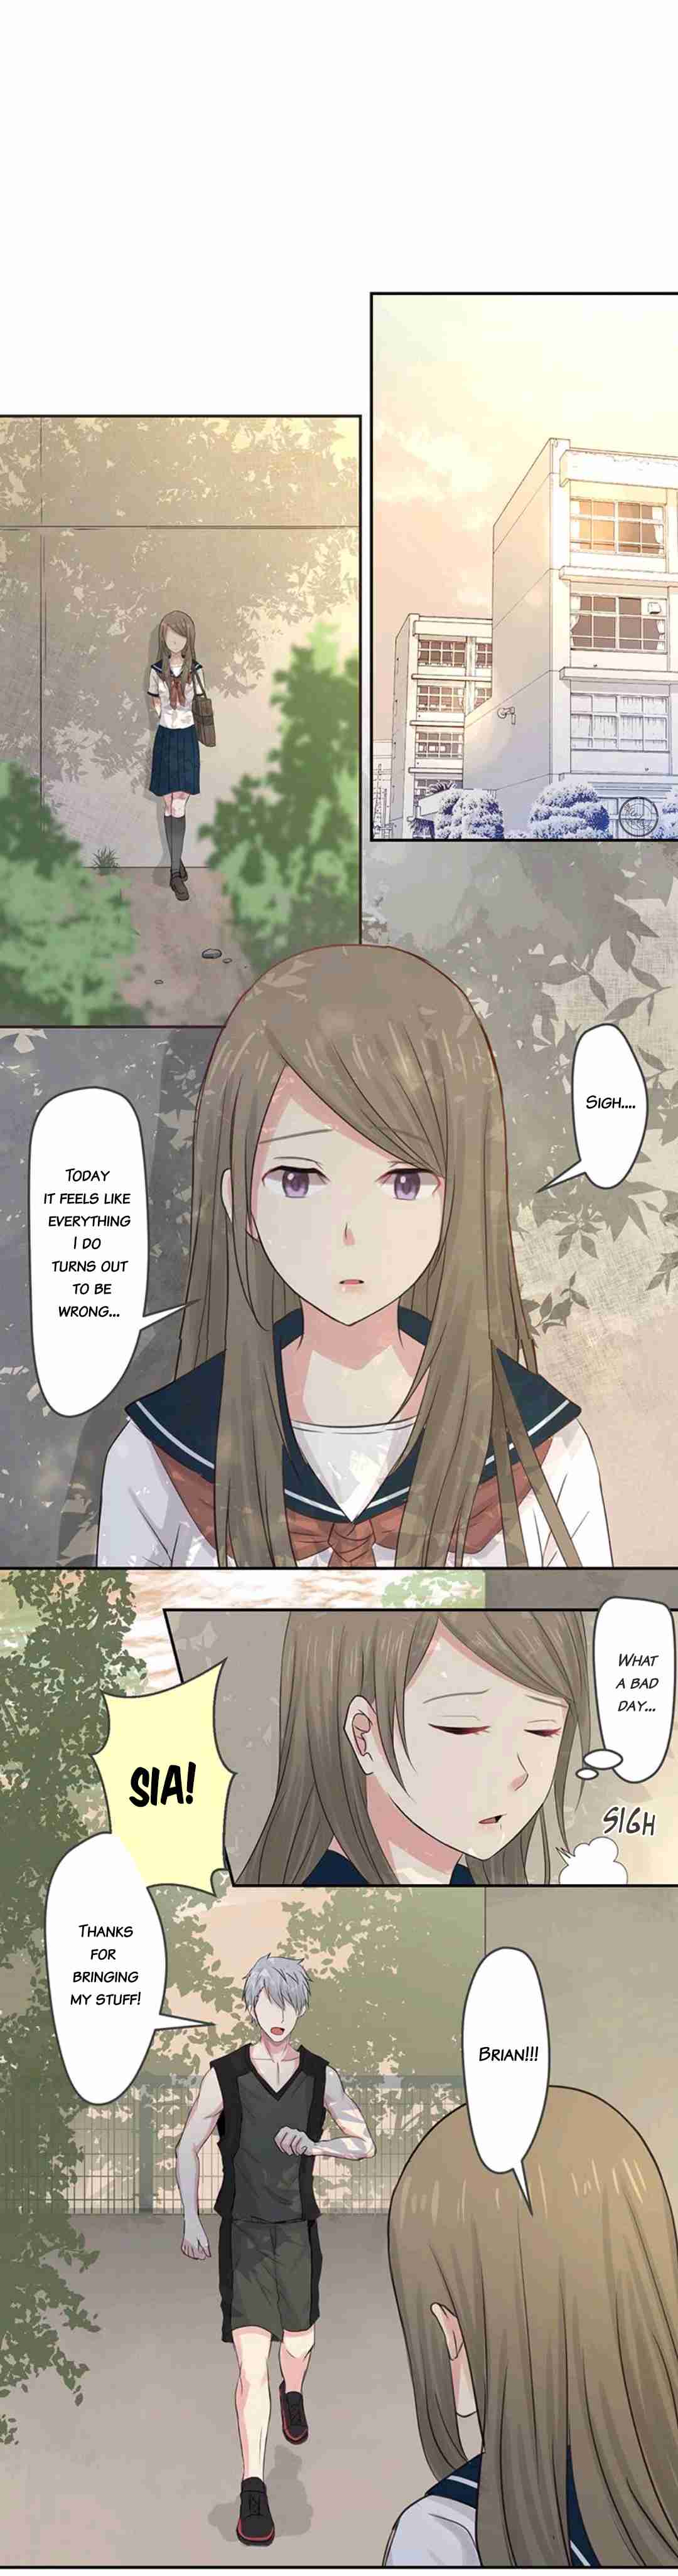 Switched Girls Ch. 5